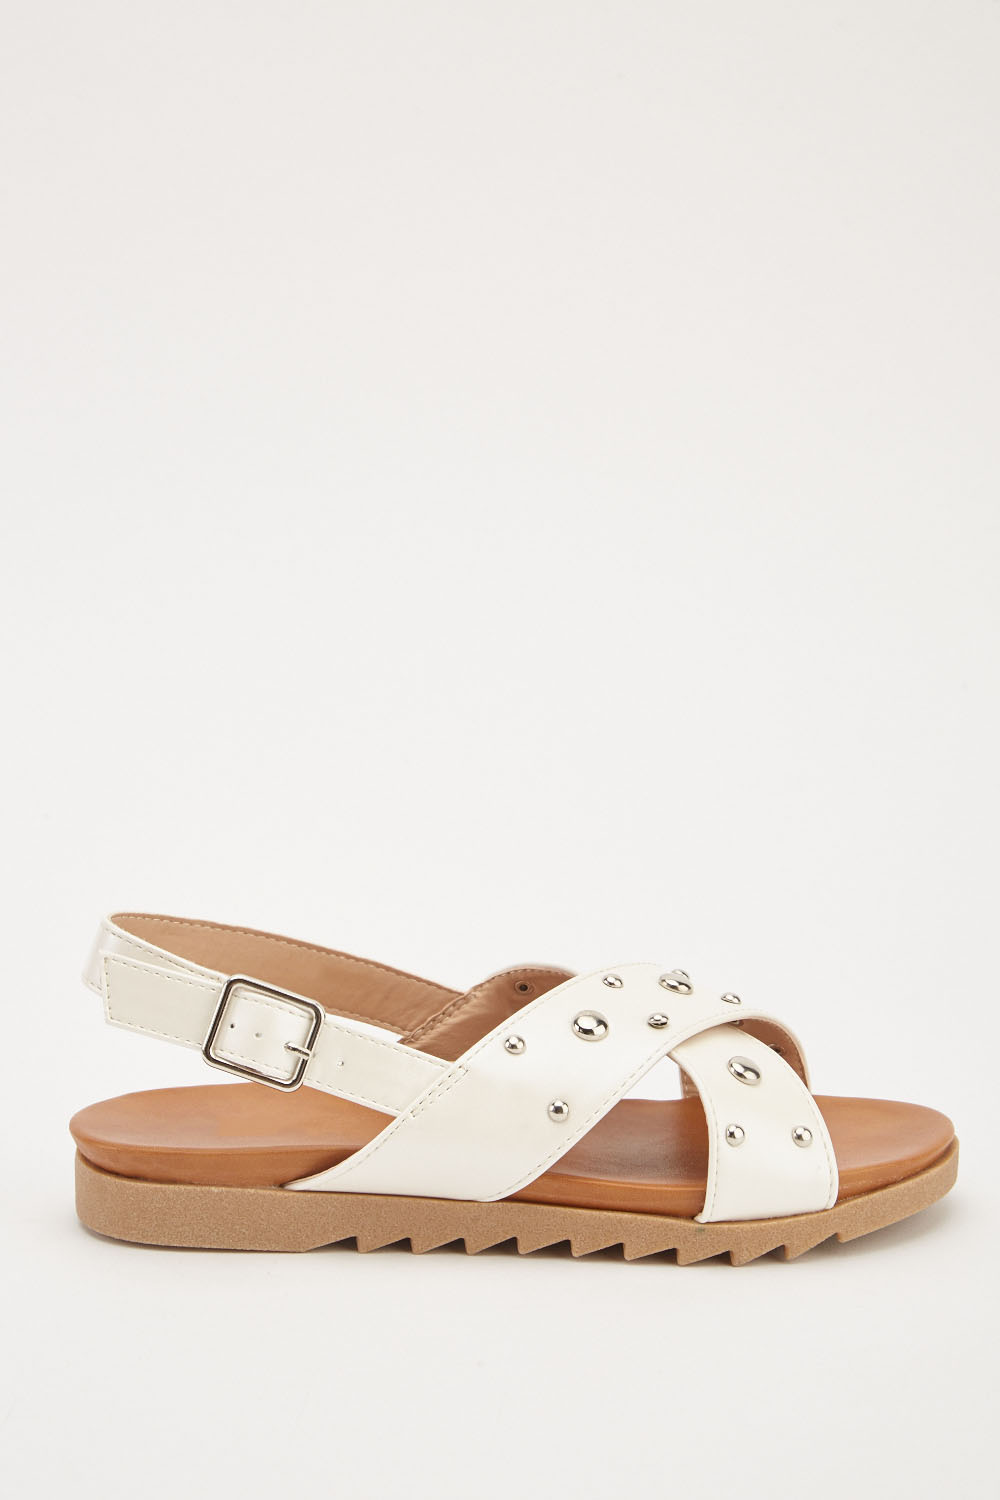 Studded Cross Strap Sandals - Just $6